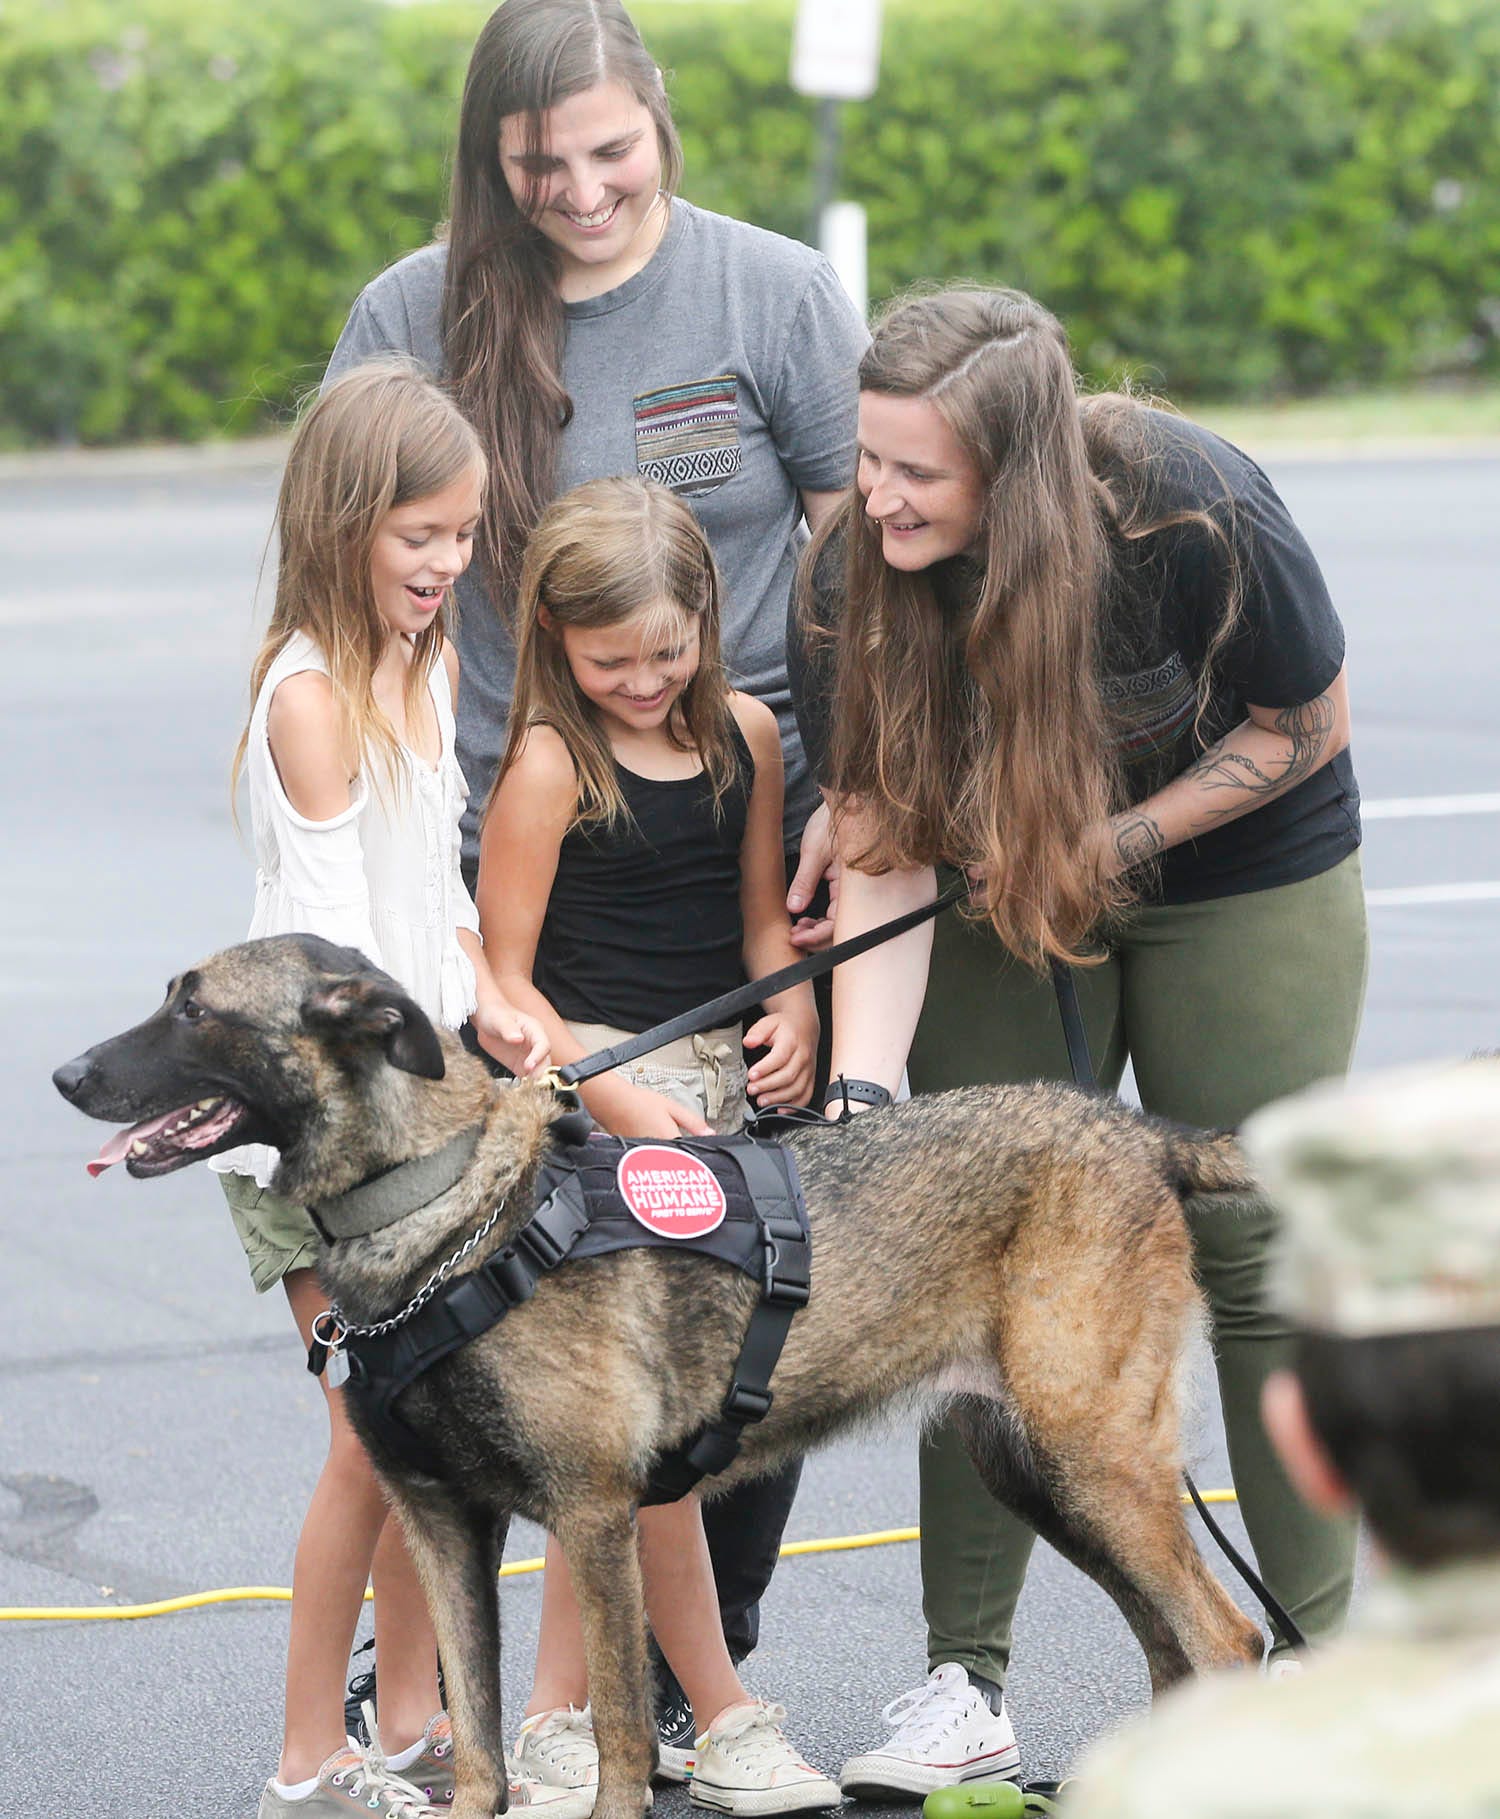 Staff Sgt. Porschia Allio-Easom, a dog handler at Eglin Air Force Base,right, along with daughters Shaylee, Ruby, and  wife Shelby Allio-Easom, stands with retired military dog Luna in a reunion event at the Eglin Federal Credit Union on Eglin Parkway in Fort Walton Beach.